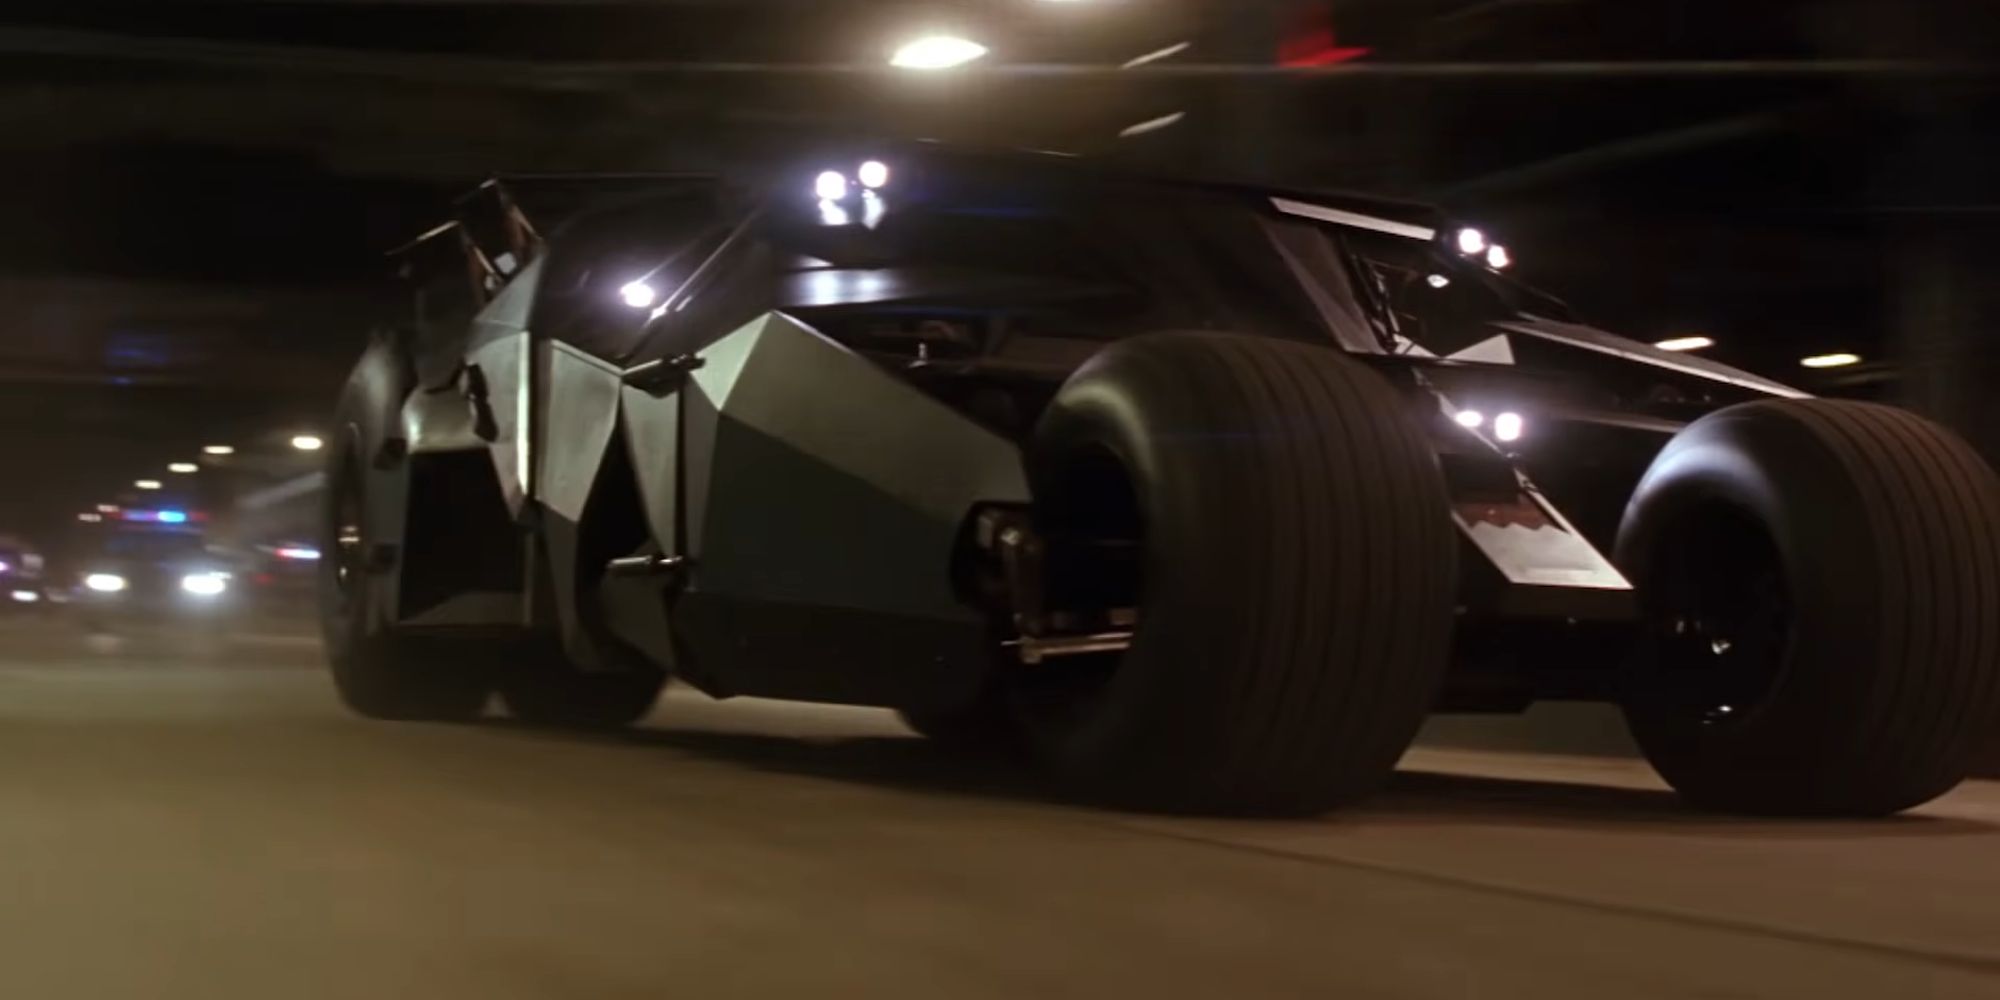 The Batmobile being chased by the police in Batman Begins